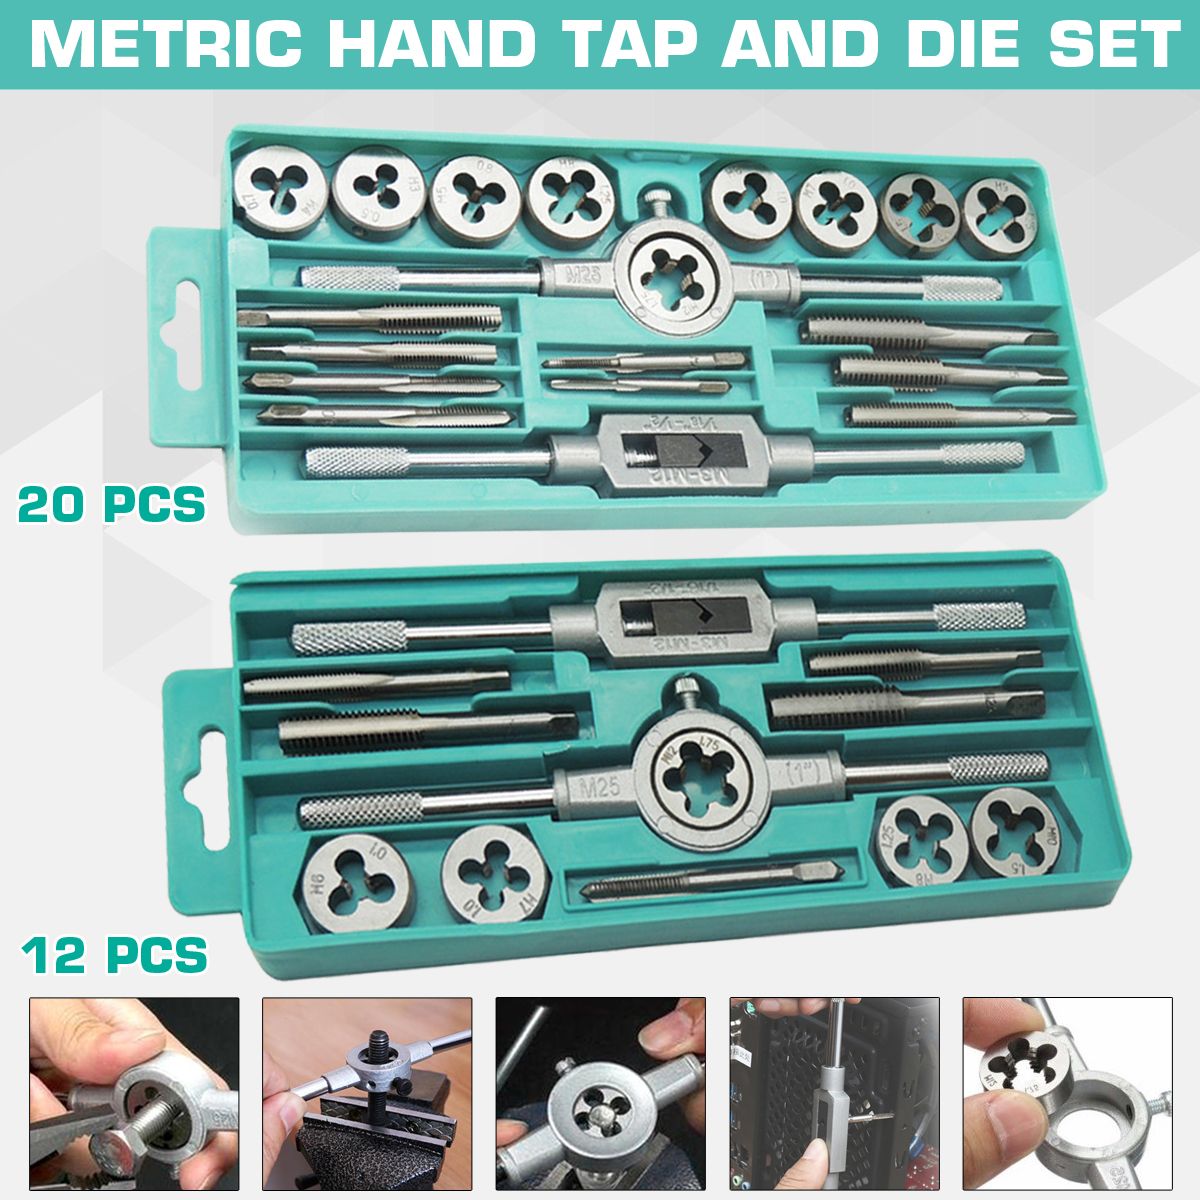 Hand-Screw-Thread-Metric-Plug-Tap-Set-M3-M12-with-Adjustable-Tap-Wrench-12inch-1675290